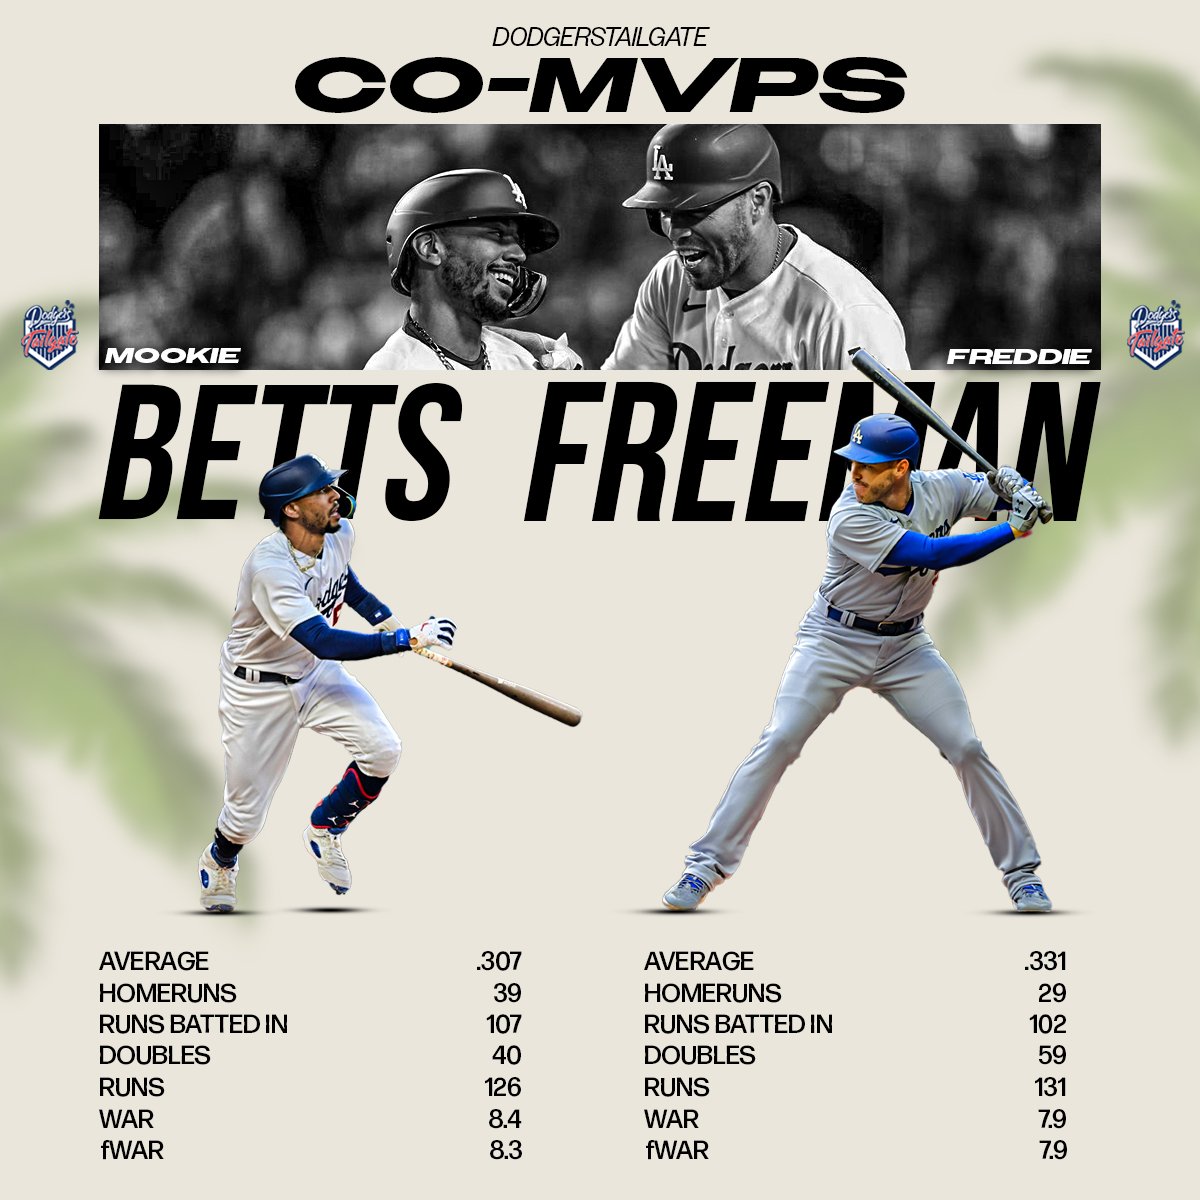 170 hits, 80 extra-base hits, 25 home runs, 100 RBI, 70 walks and 125 runs. Freddie Freeman and Mookie Betts are the only Dodger teammates to put up such numbers. #LetsGoDodgers    Dodgers join the Yankees and Braves as the only franchises with teammates recording those stats